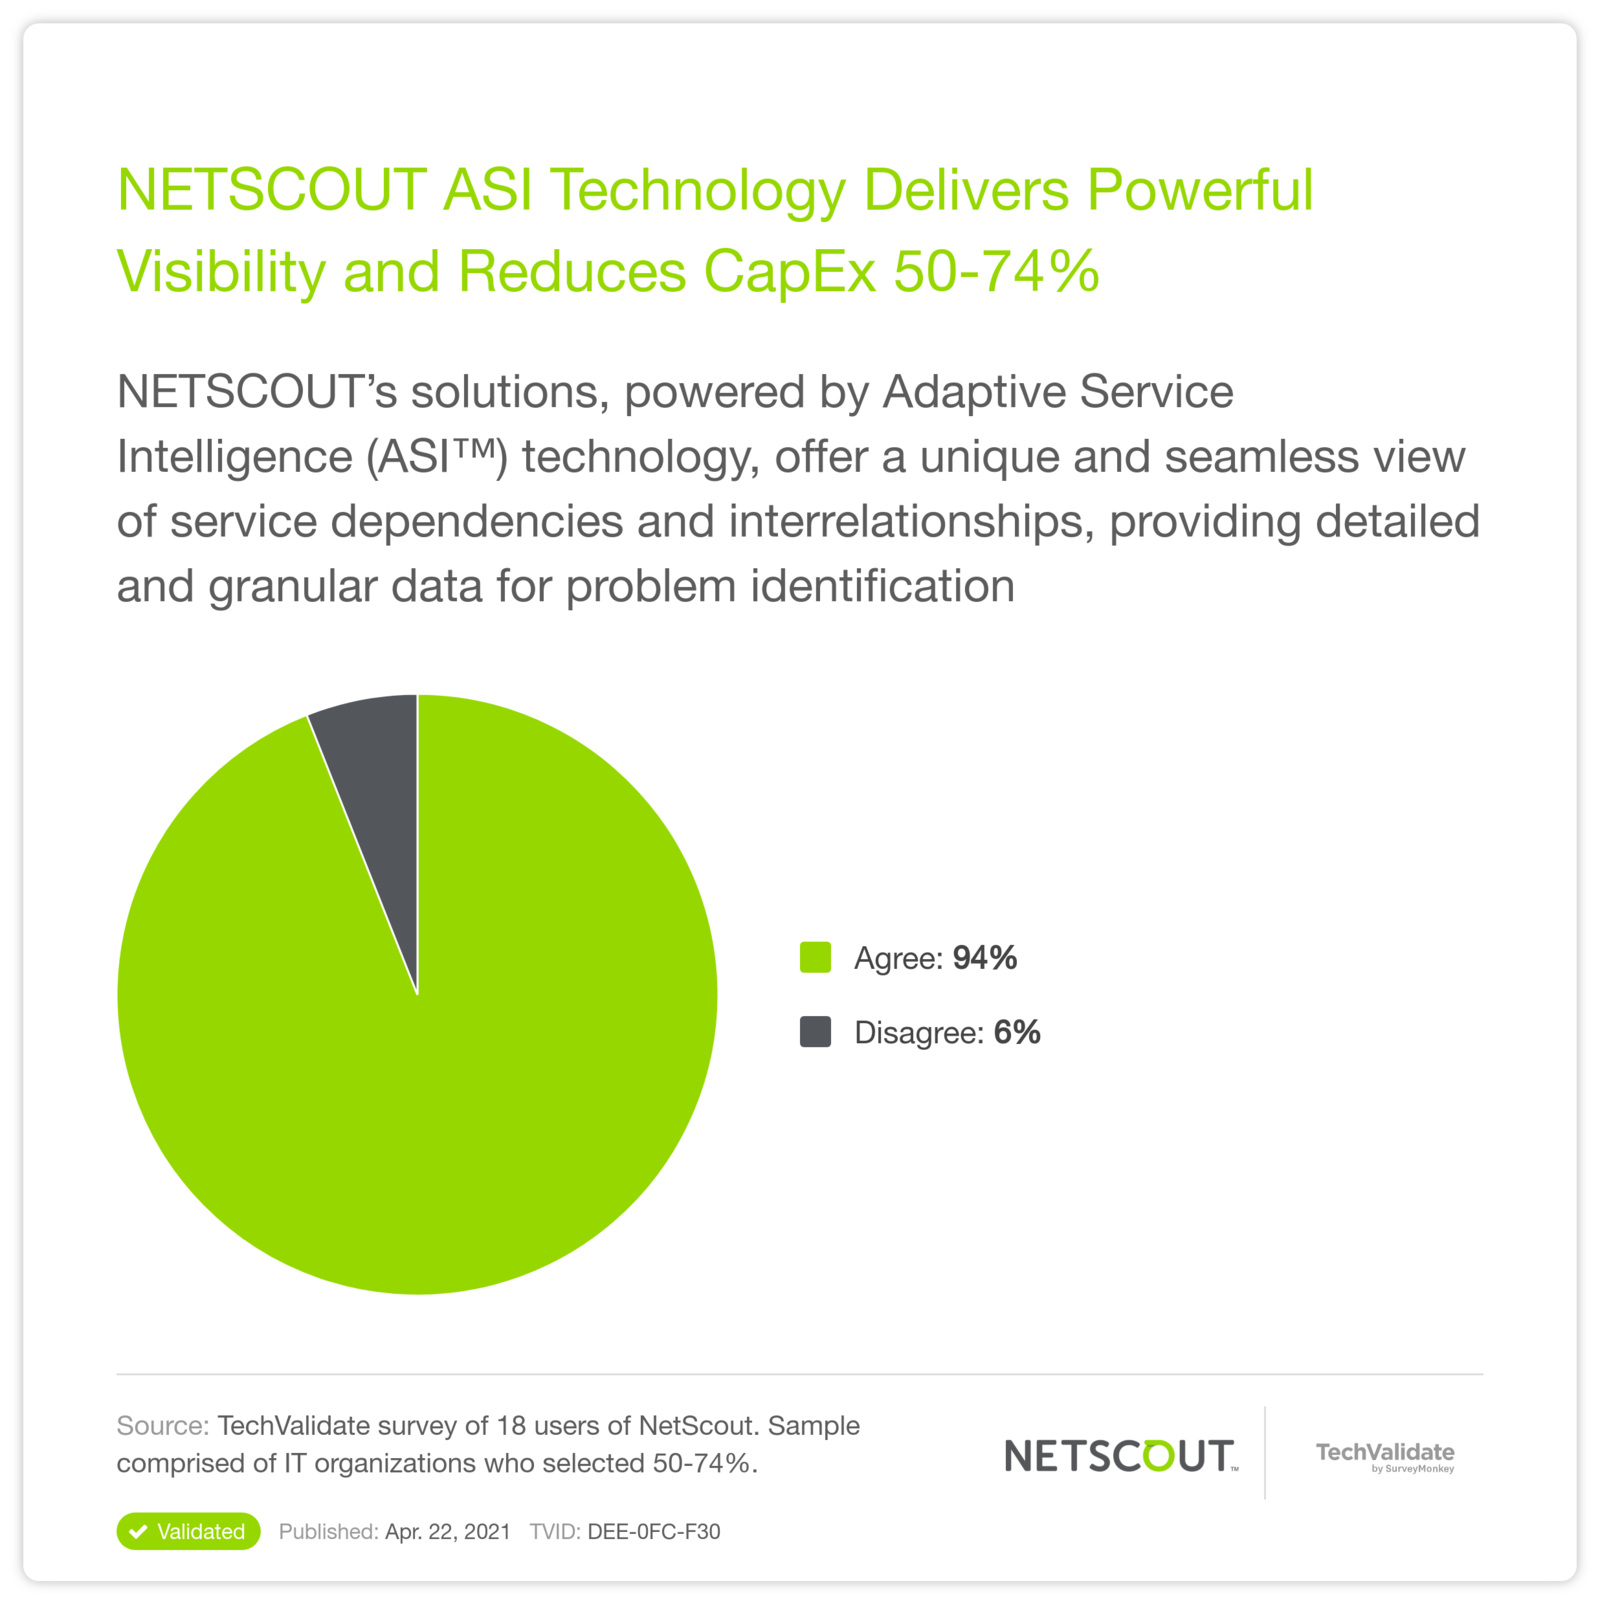 NETSCOUT ASI Technology Delivers Powerful Visibility and Reduces CapEx 50-74%